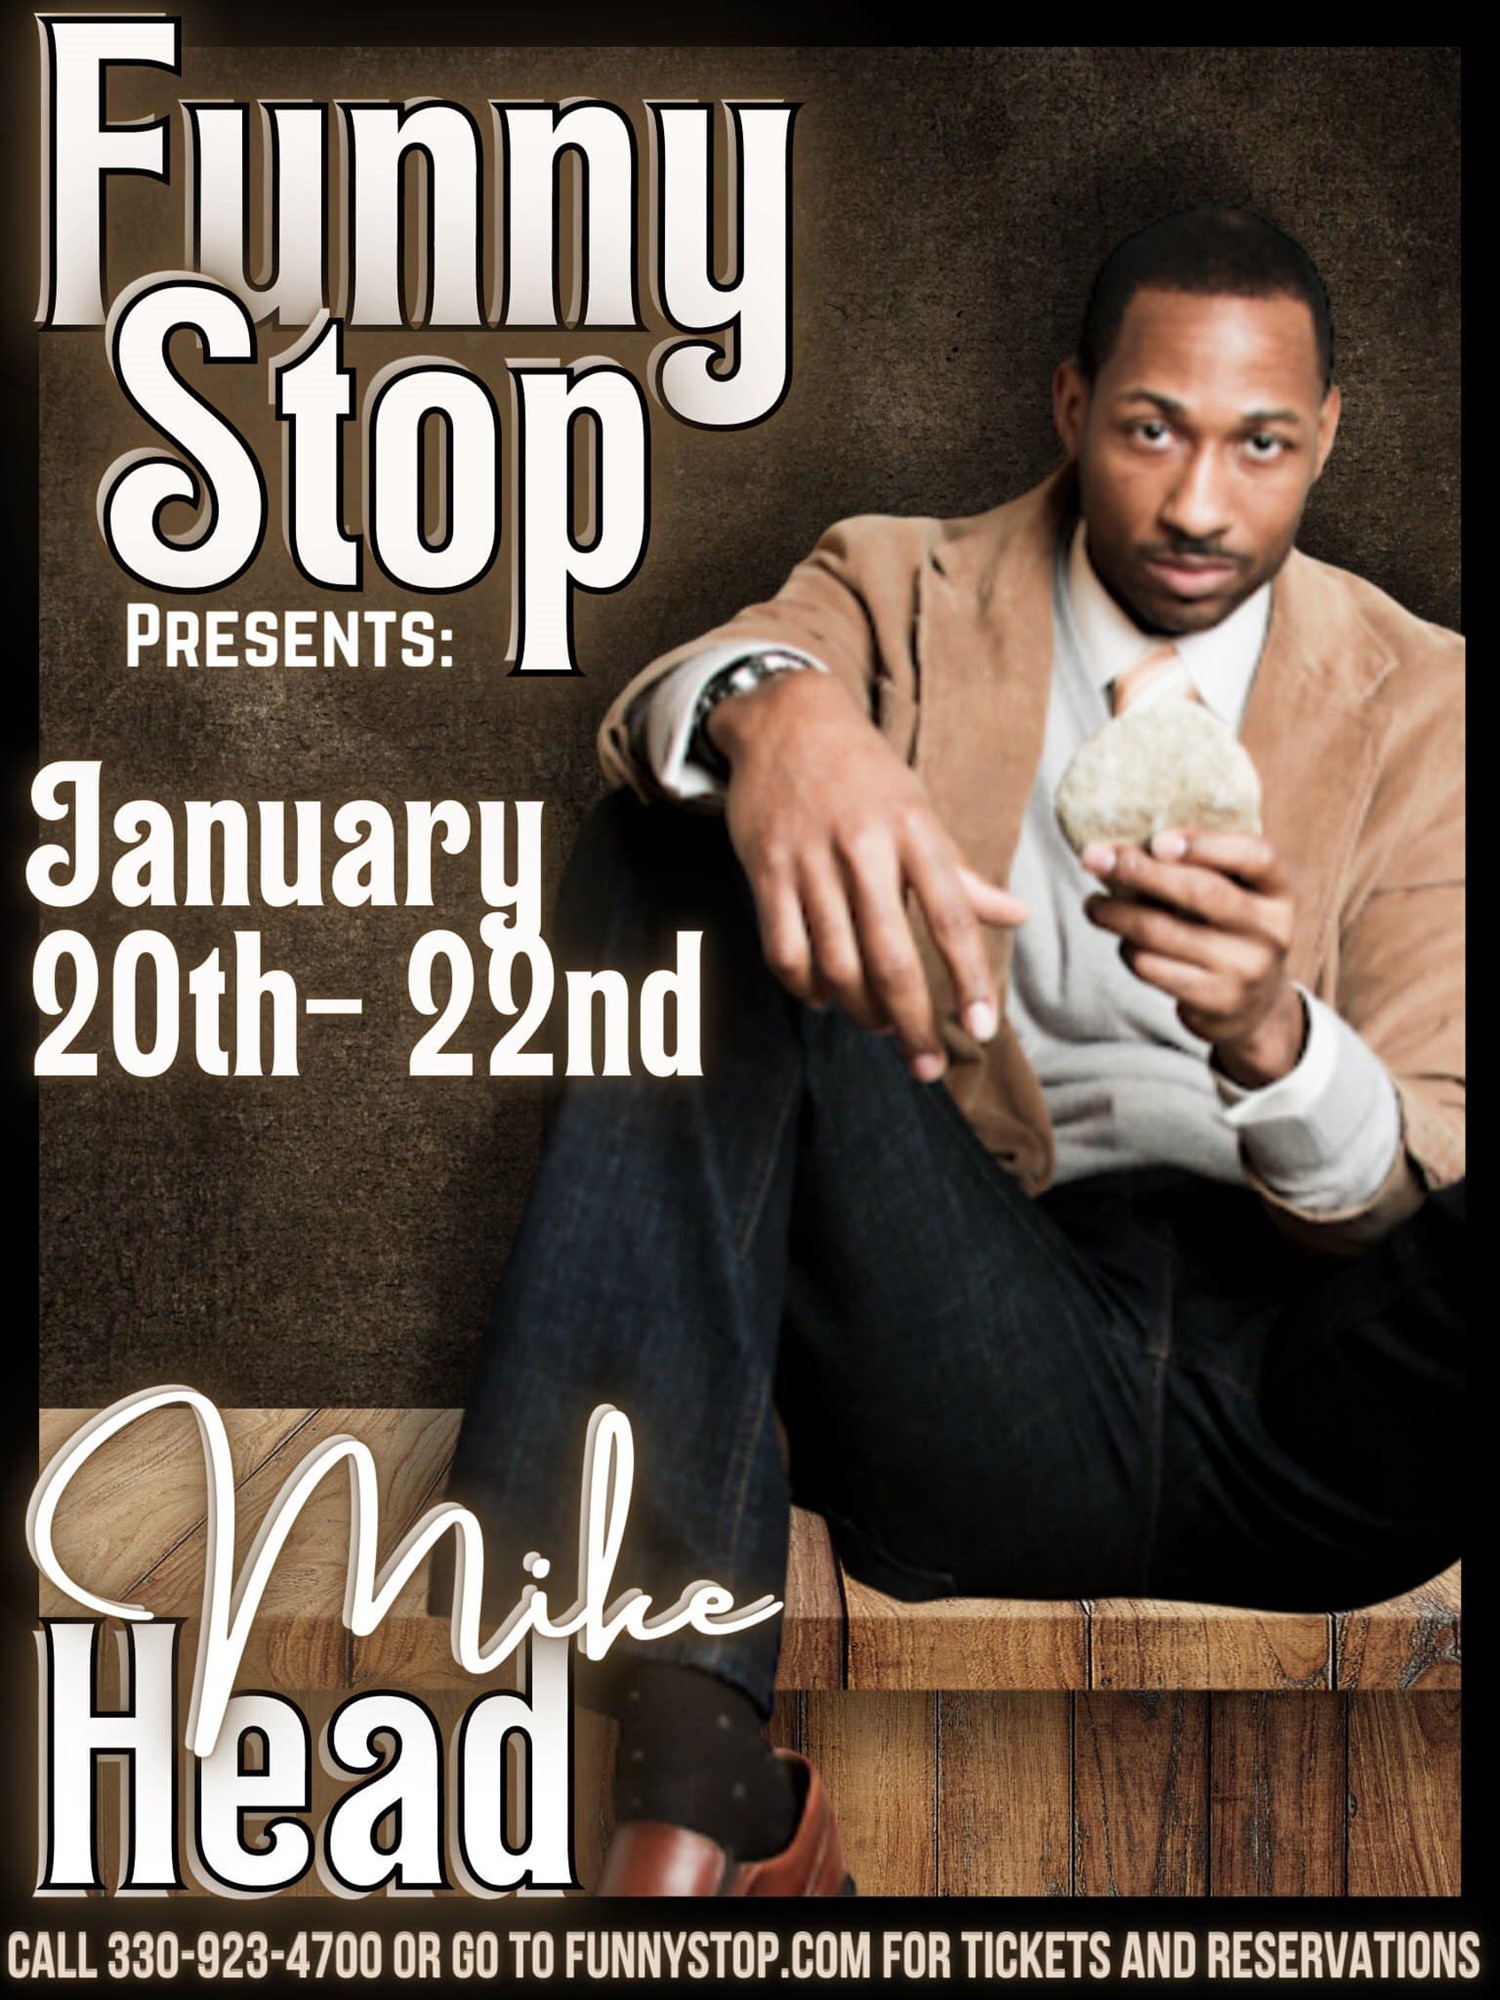 Mike Head Saturday 9:20 Show  on ene. 22, 21:20@Funny Stop Comedy Club - Buy tickets and Get information on Funny Stop funnystop.online